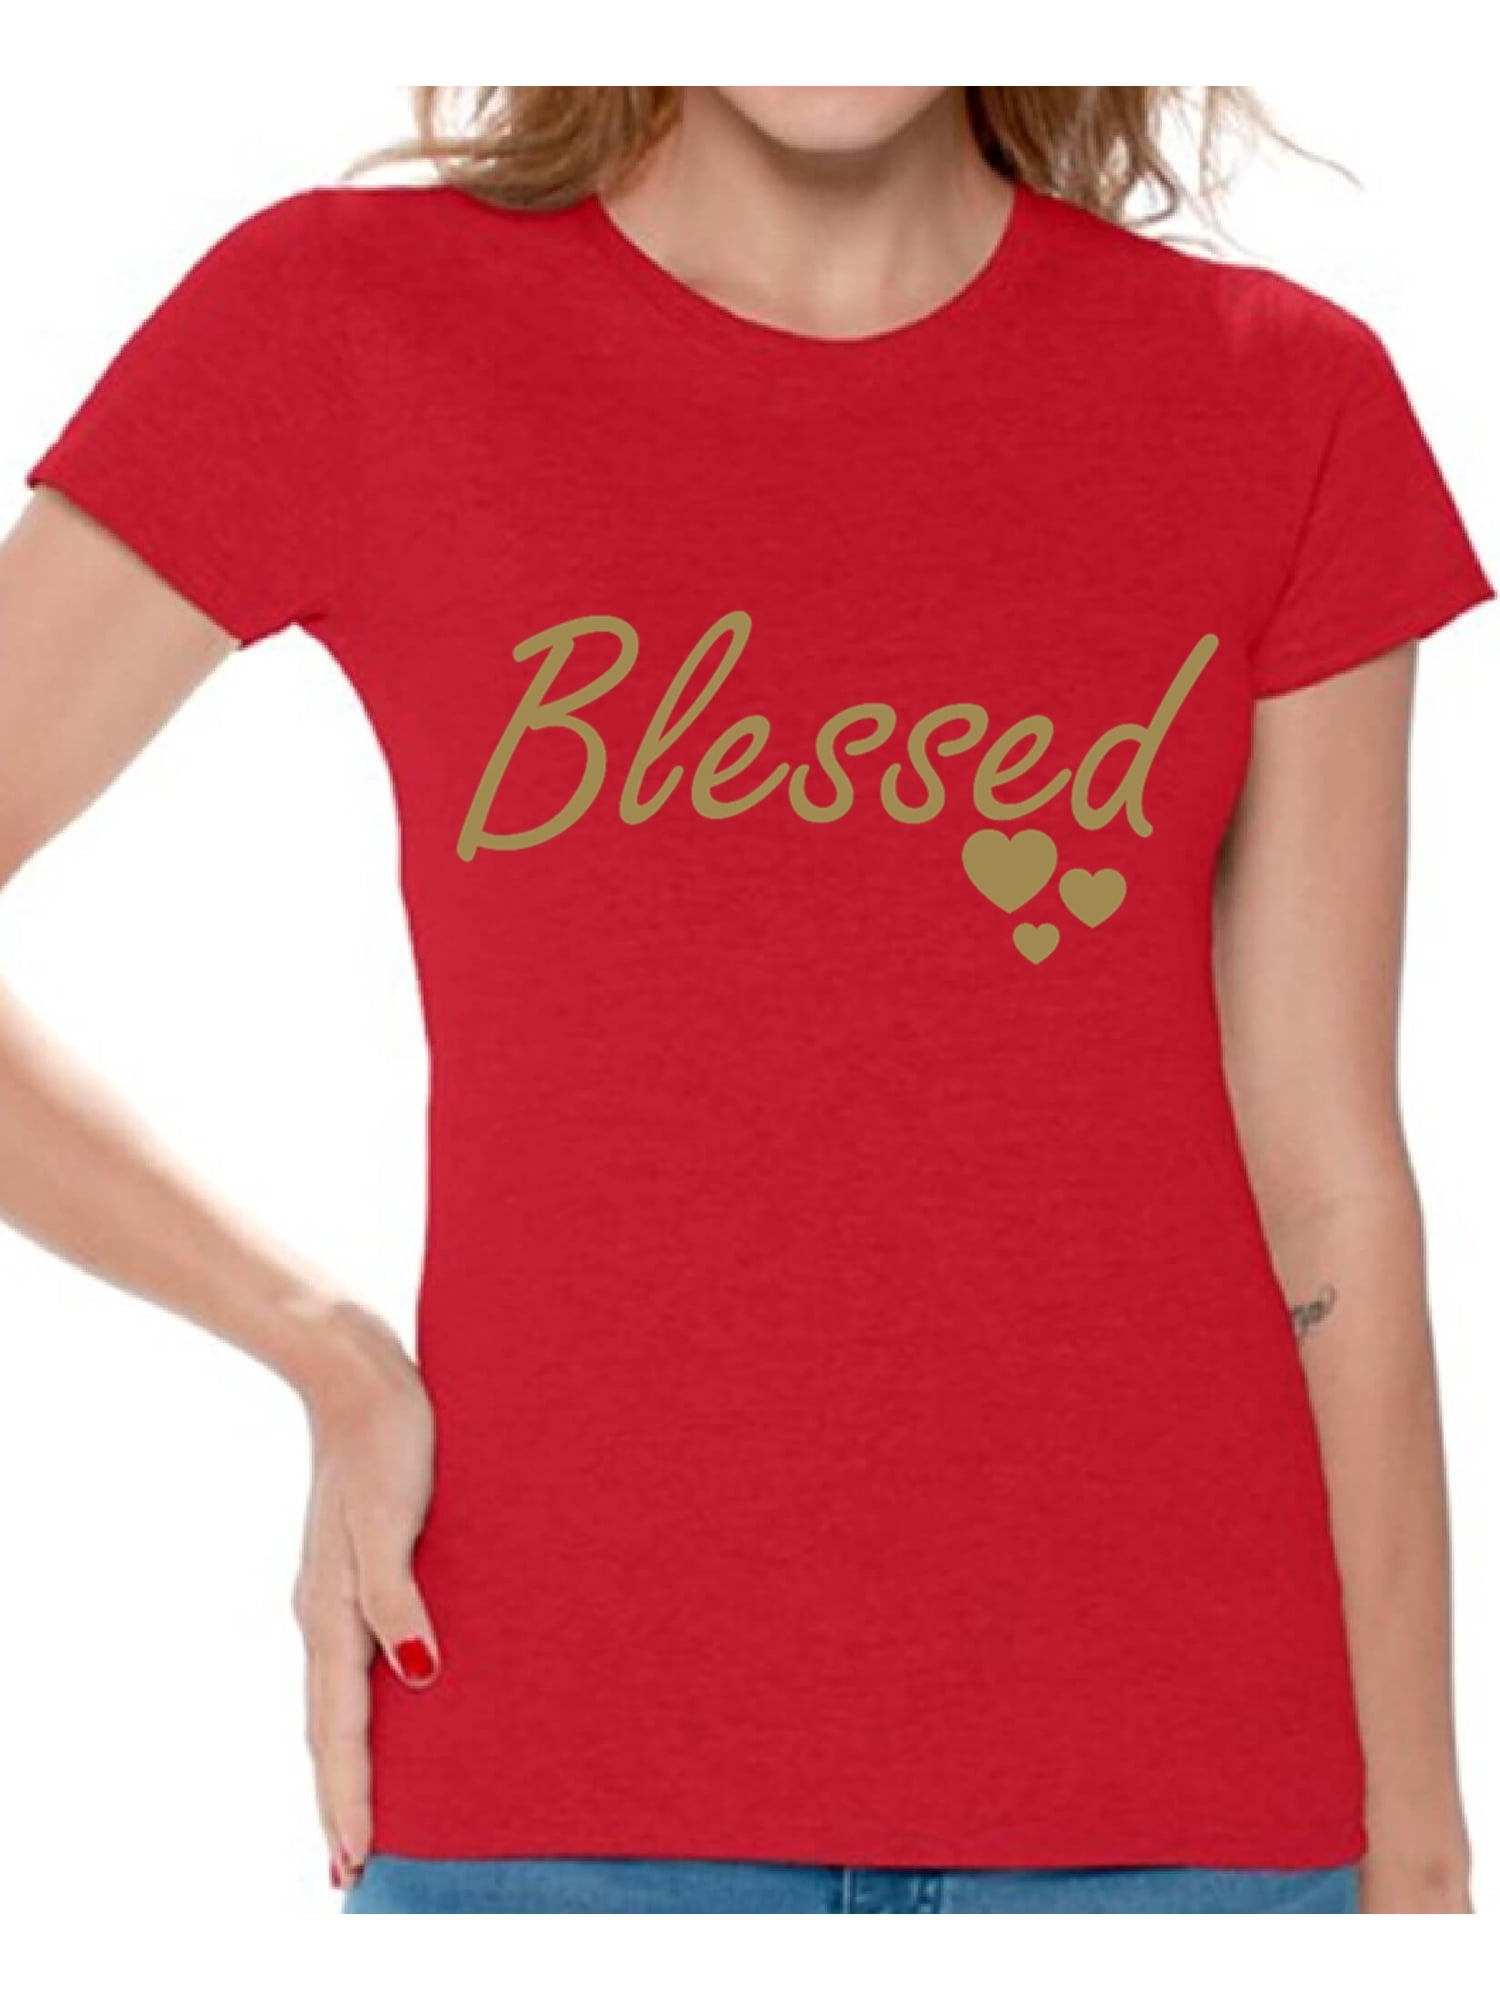 gift for friend graphic t shirt blessed and dog obsessed 34 sleeve raglan shirt ladies shirt